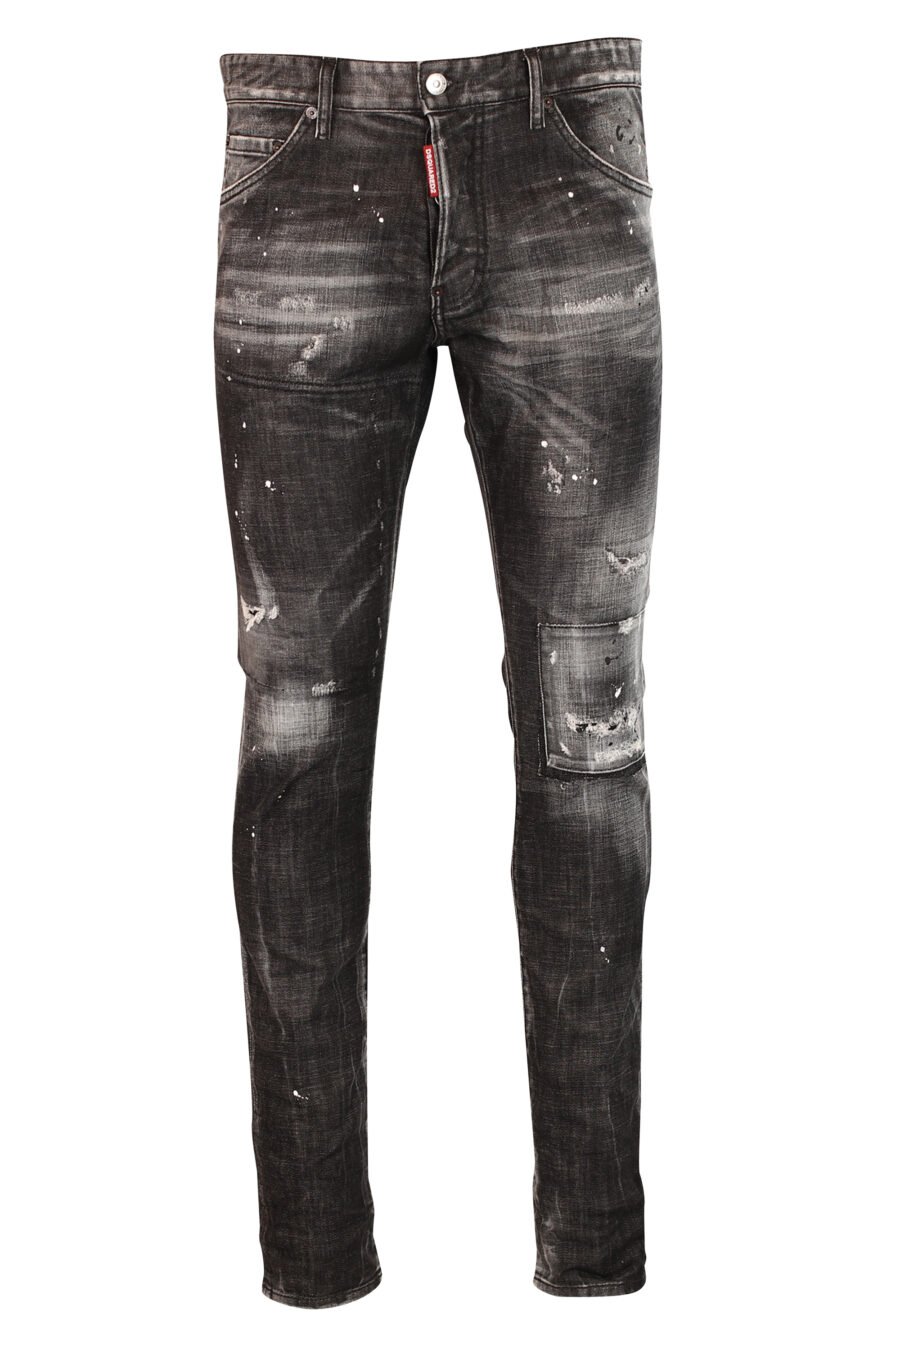 Dsquared2 - Cool guy jean trousers black semi worn and ripped ...